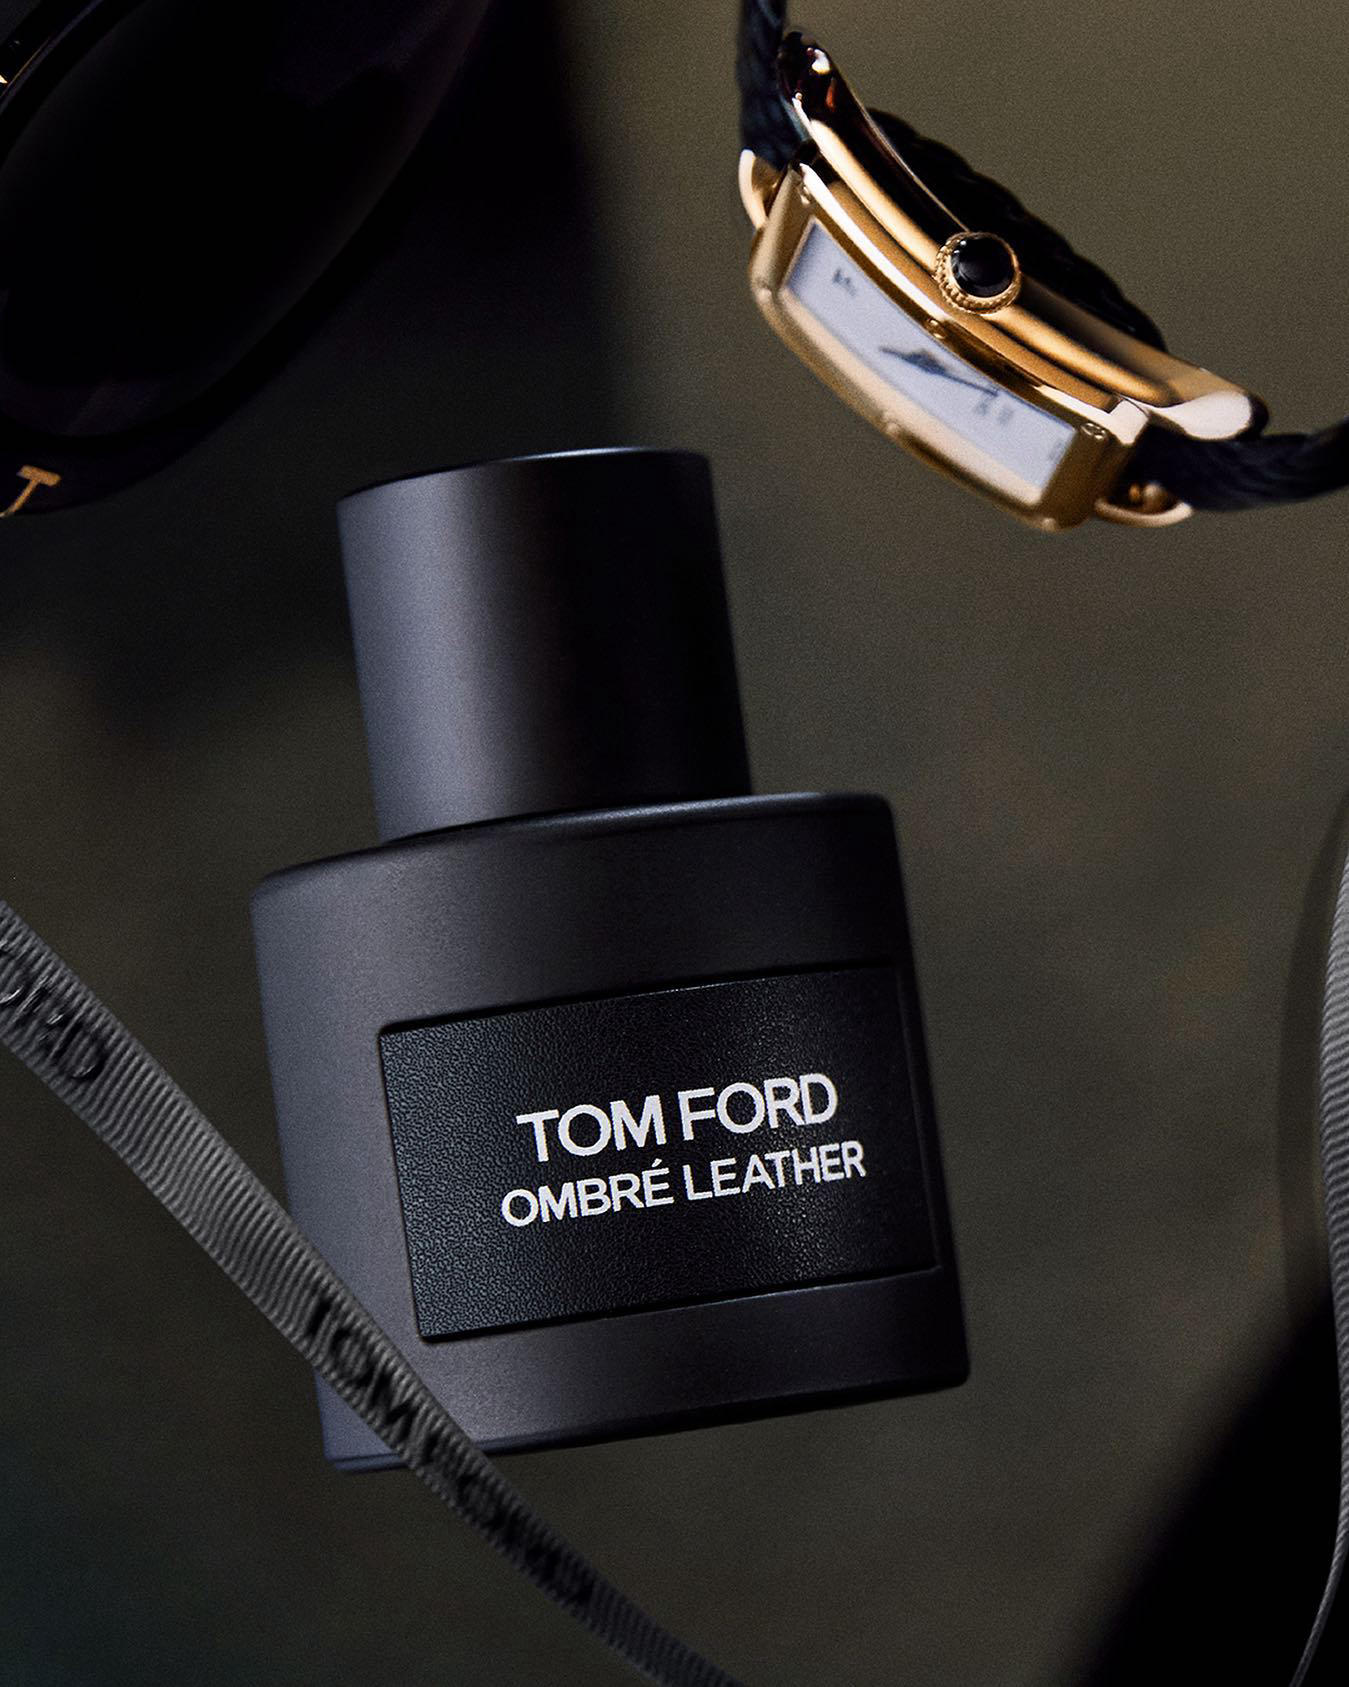 image  1 TOM FORD - OMBRÉ LEATHER, A SEDUCTIVE FLORAL LEATHER FRAGRANCE